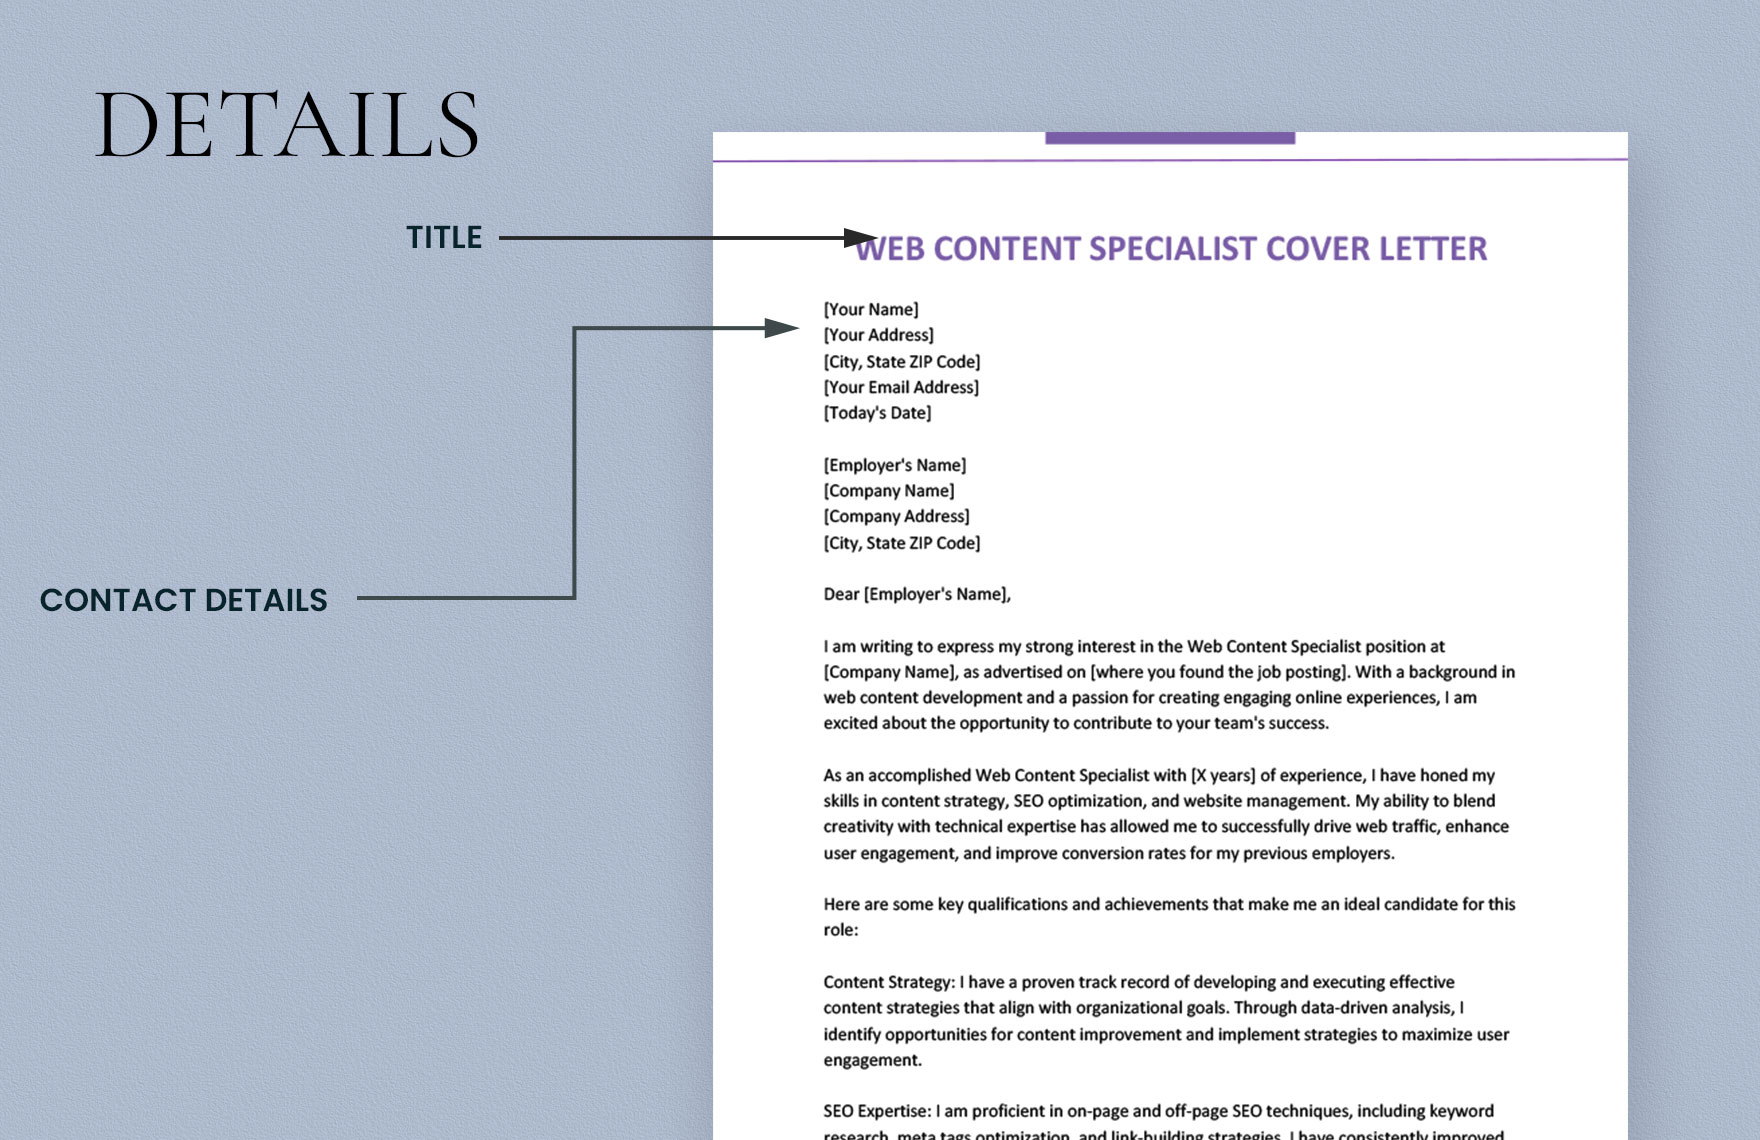 Web Content Specialist Cover Letter